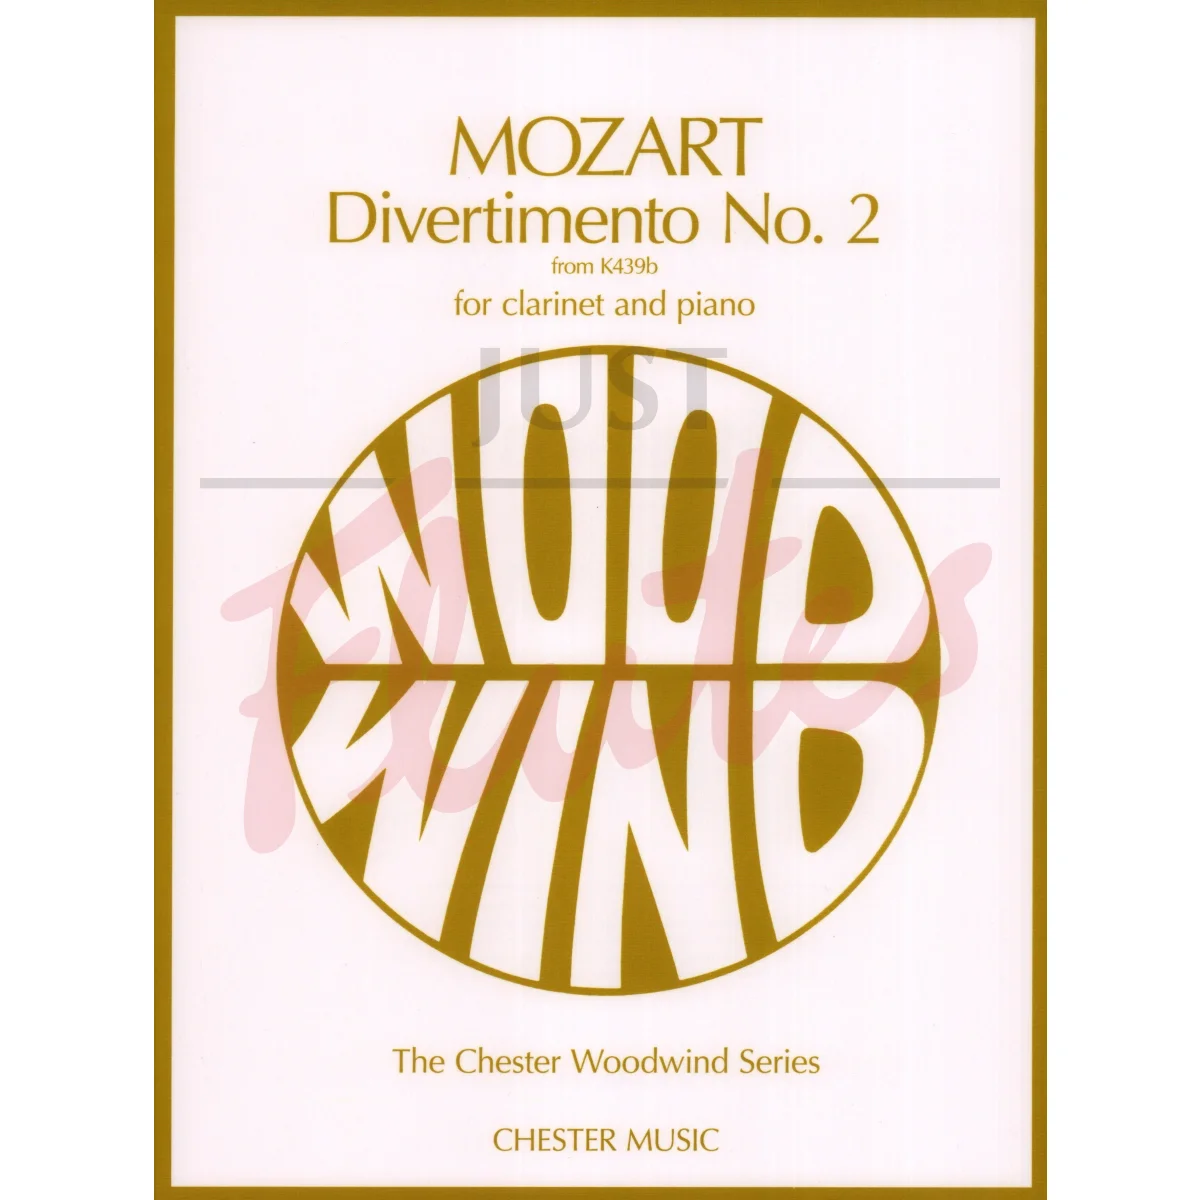 Divertimento No 2 from K439b for Clarinet and Piano